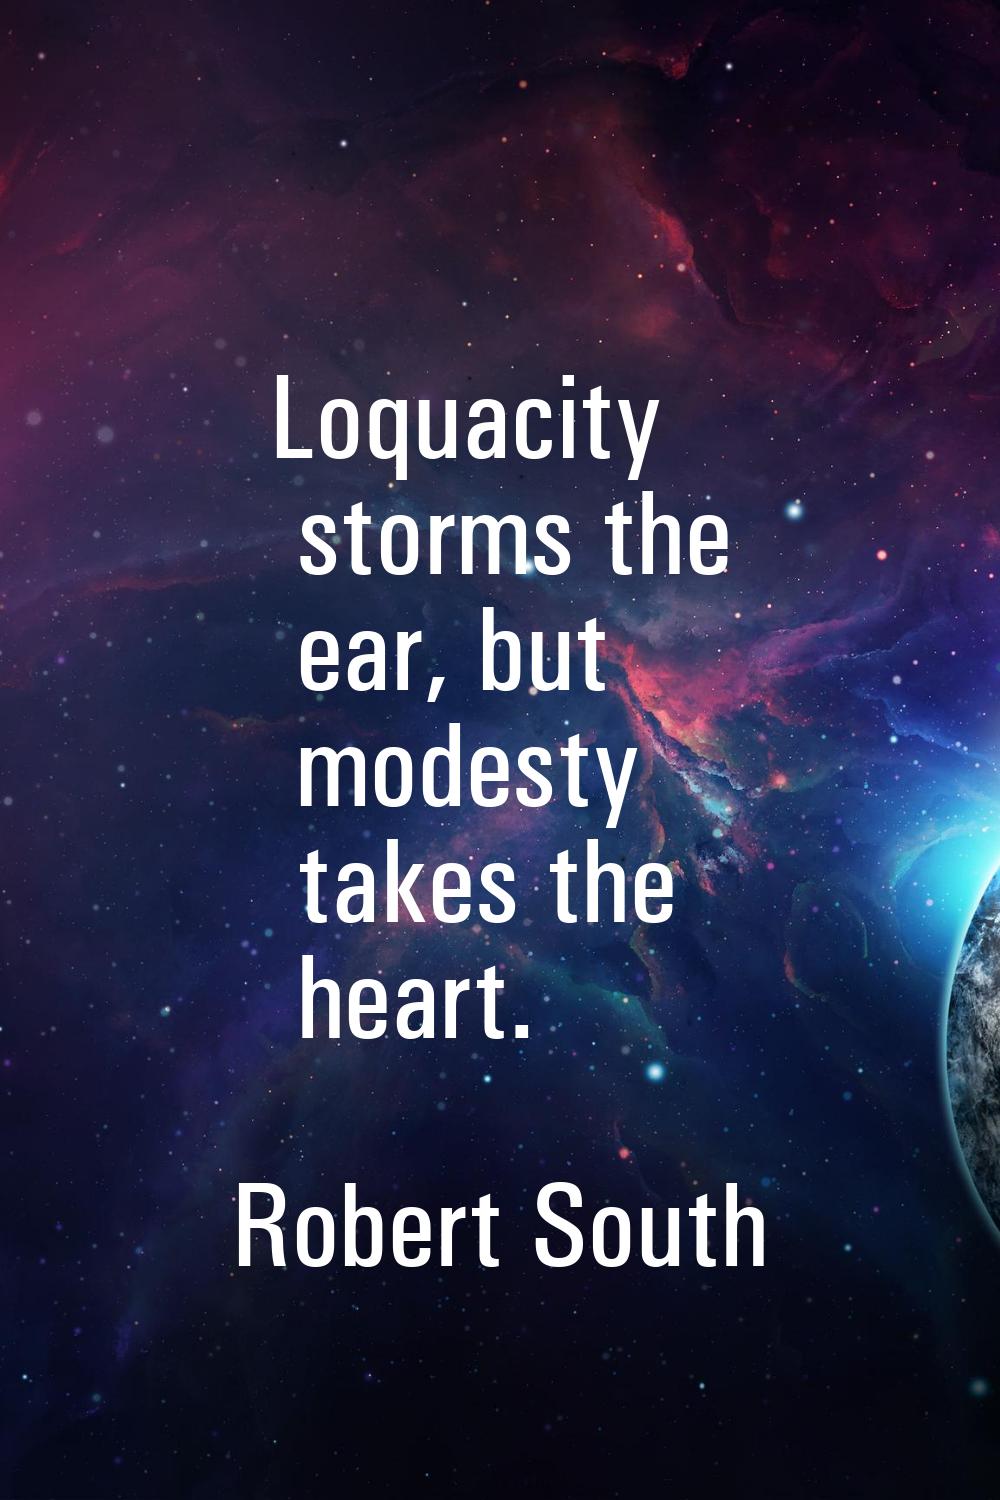 Loquacity storms the ear, but modesty takes the heart.